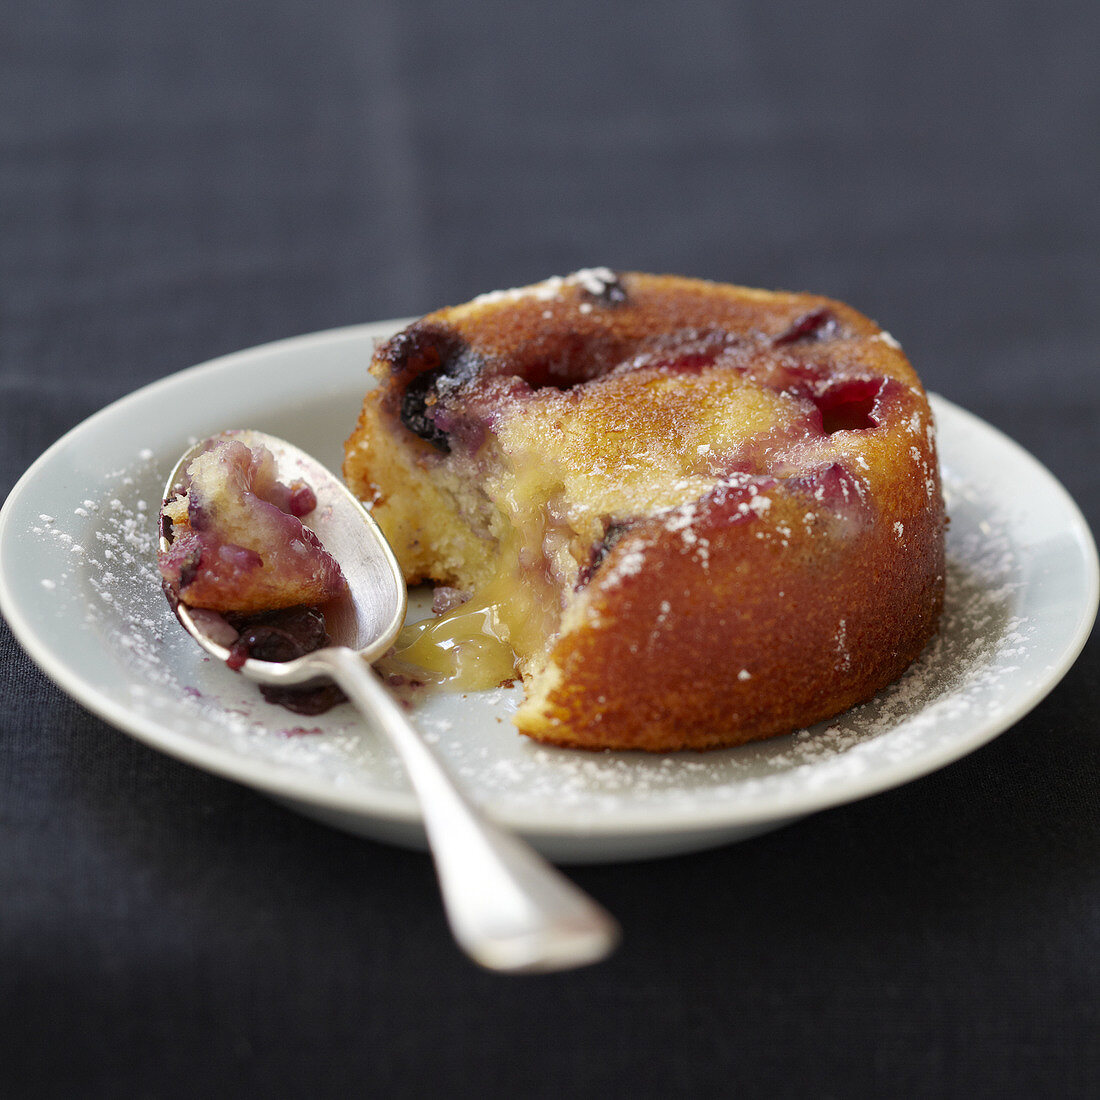 Faisselle,lemon curd and blueberry small pudding